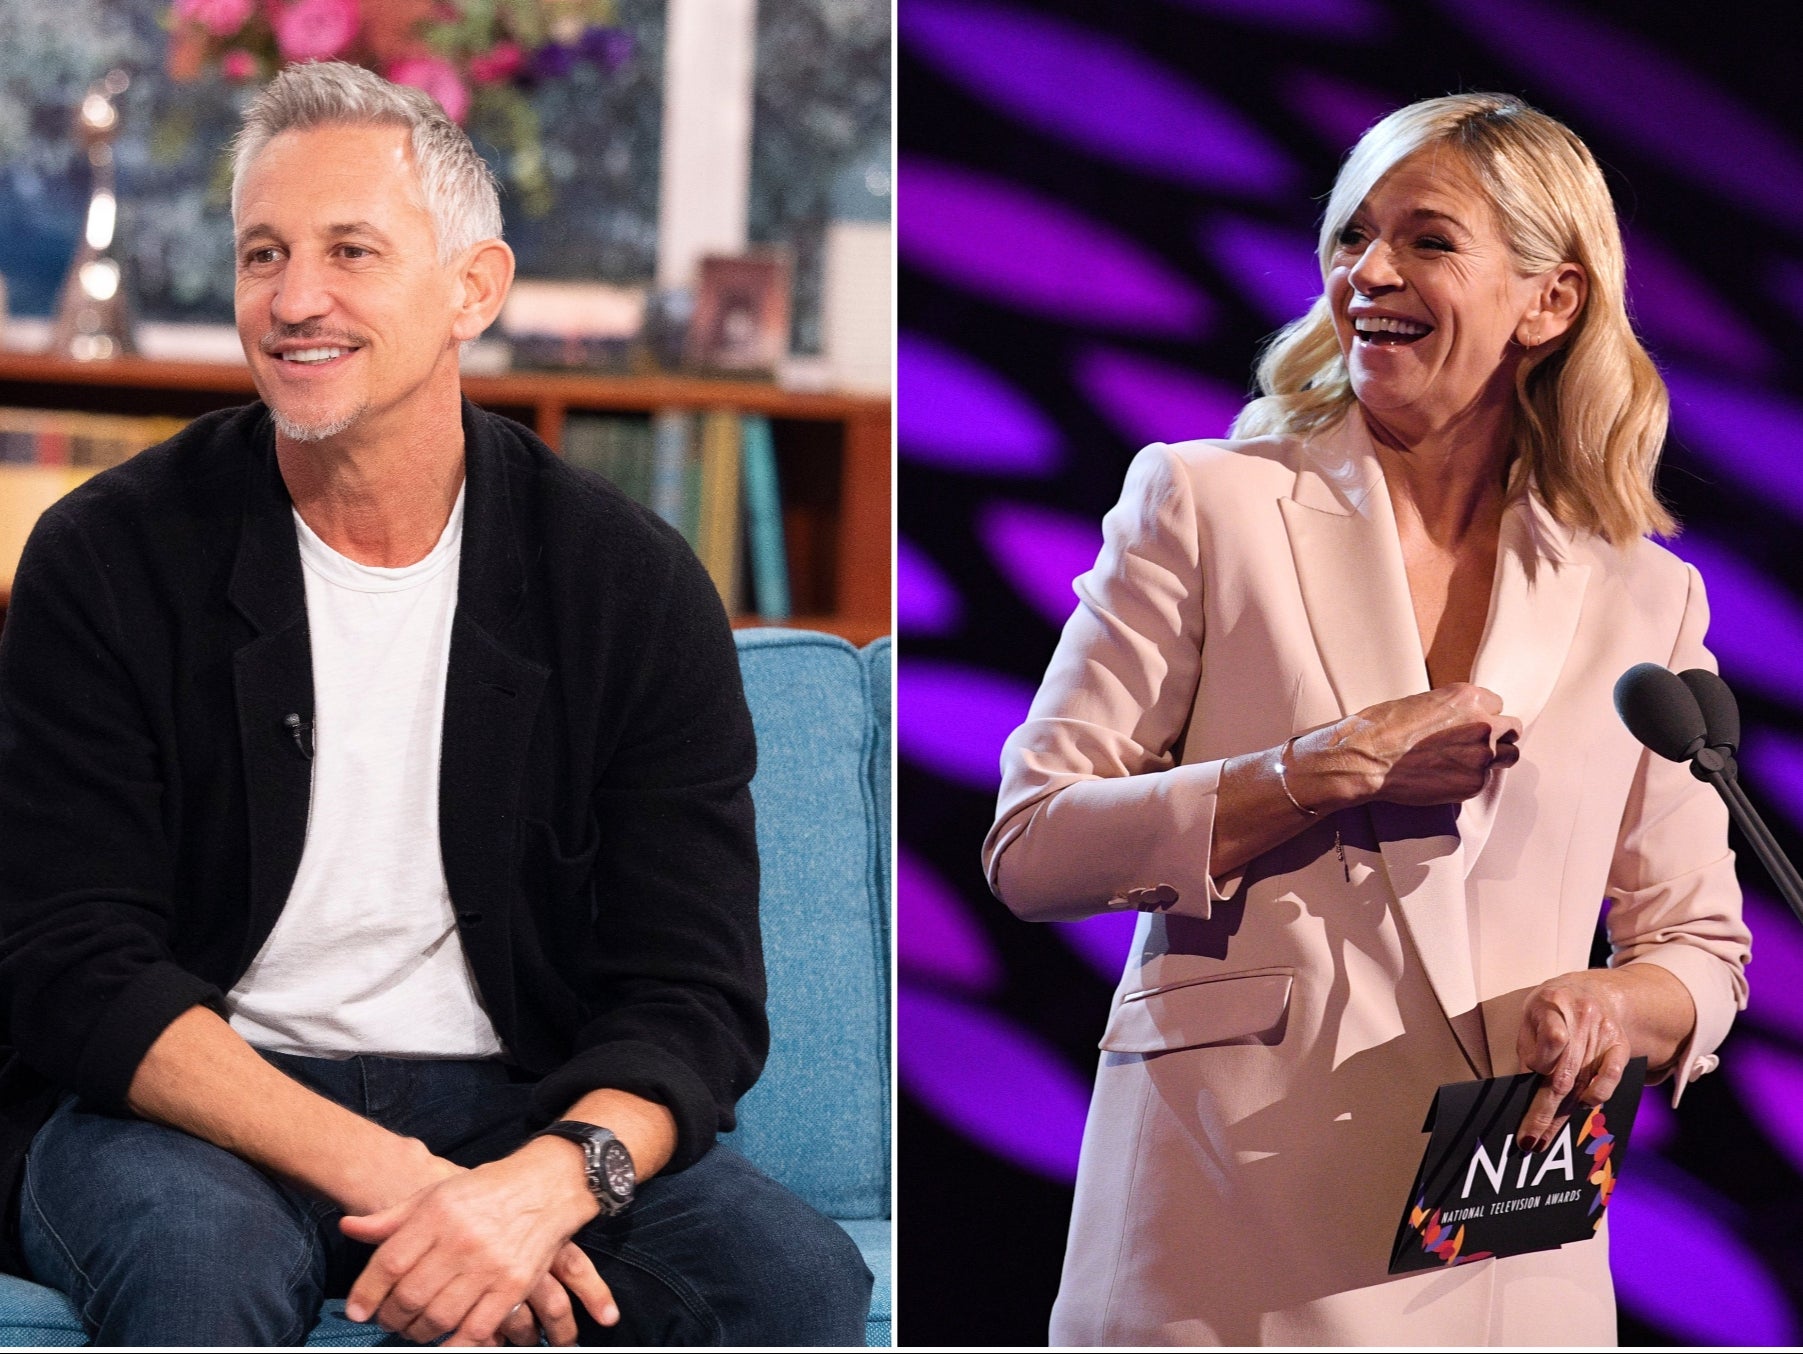 Gary Lineker remains the BBC’s highest-paid star, while Zoe Ball received a ?1m pay rise this year